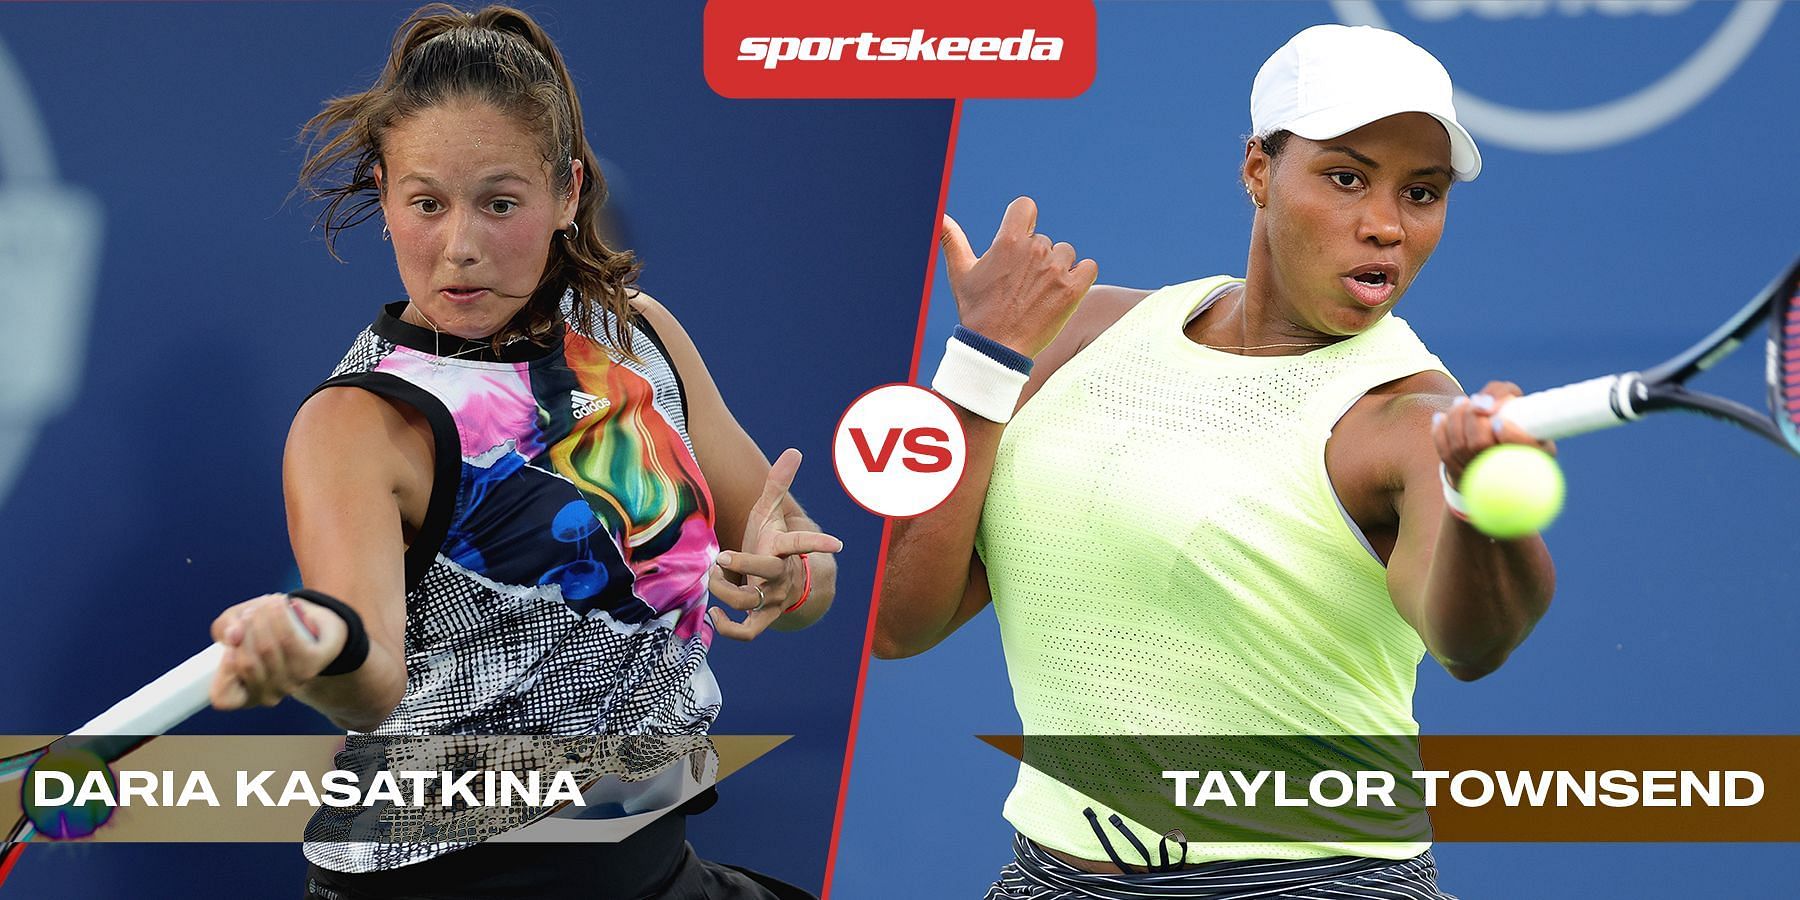 Kasatkina will take on Townsend in the second round of the Silicon Valley Classic